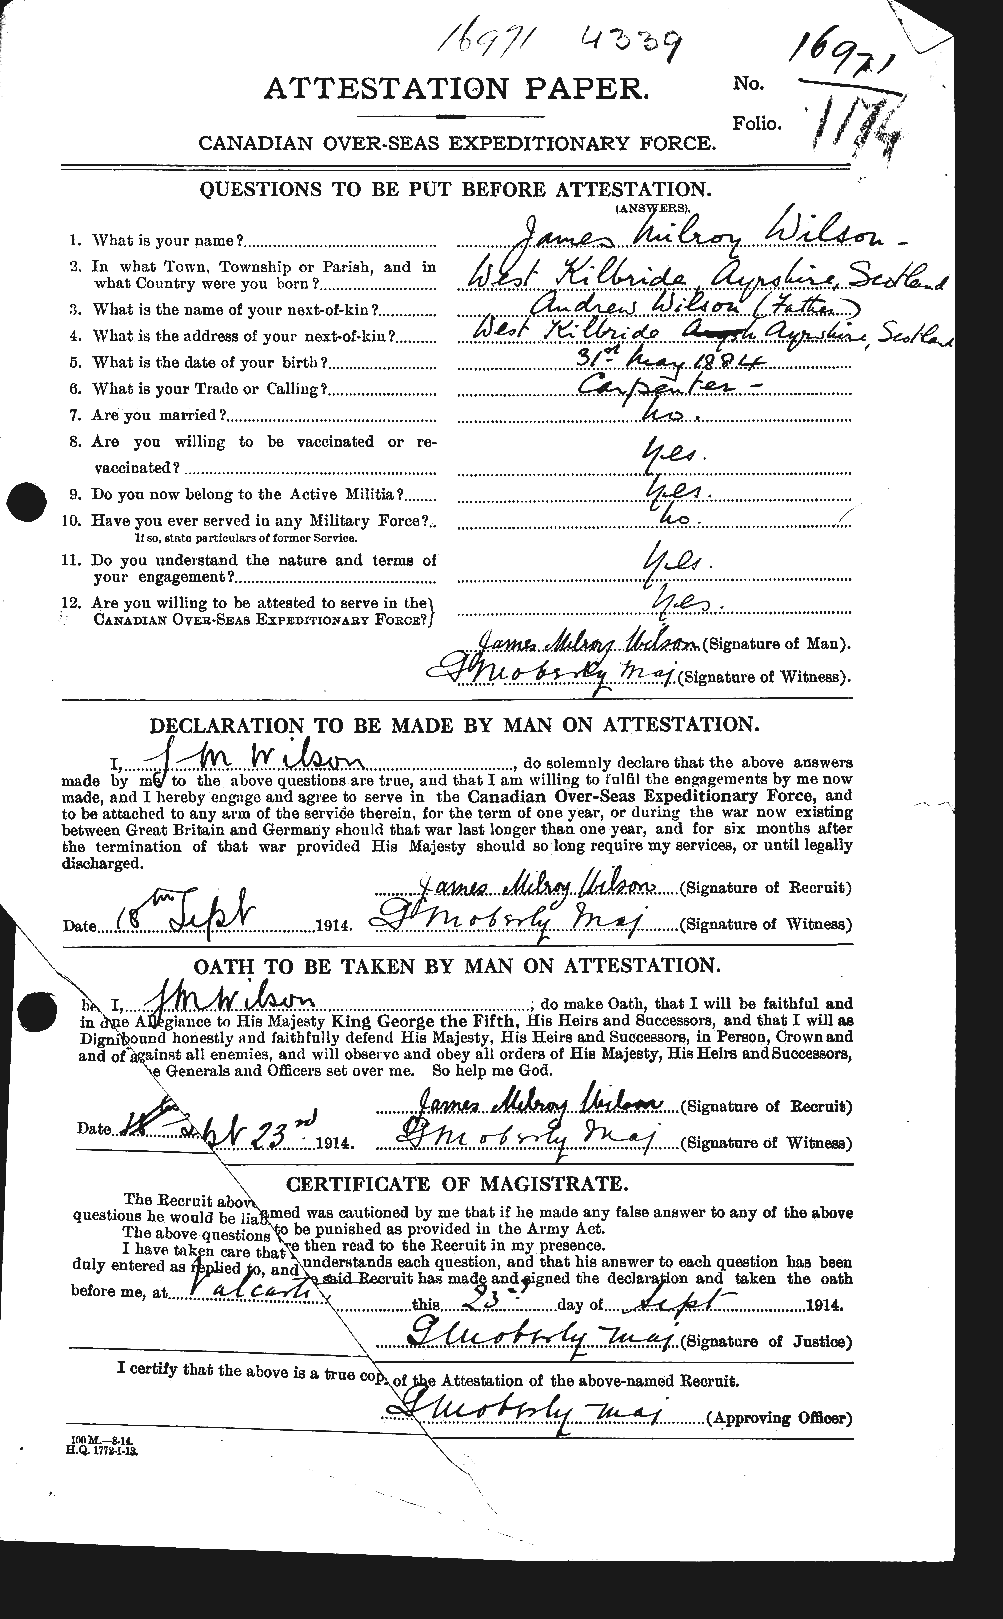 Personnel Records of the First World War - CEF 681486a